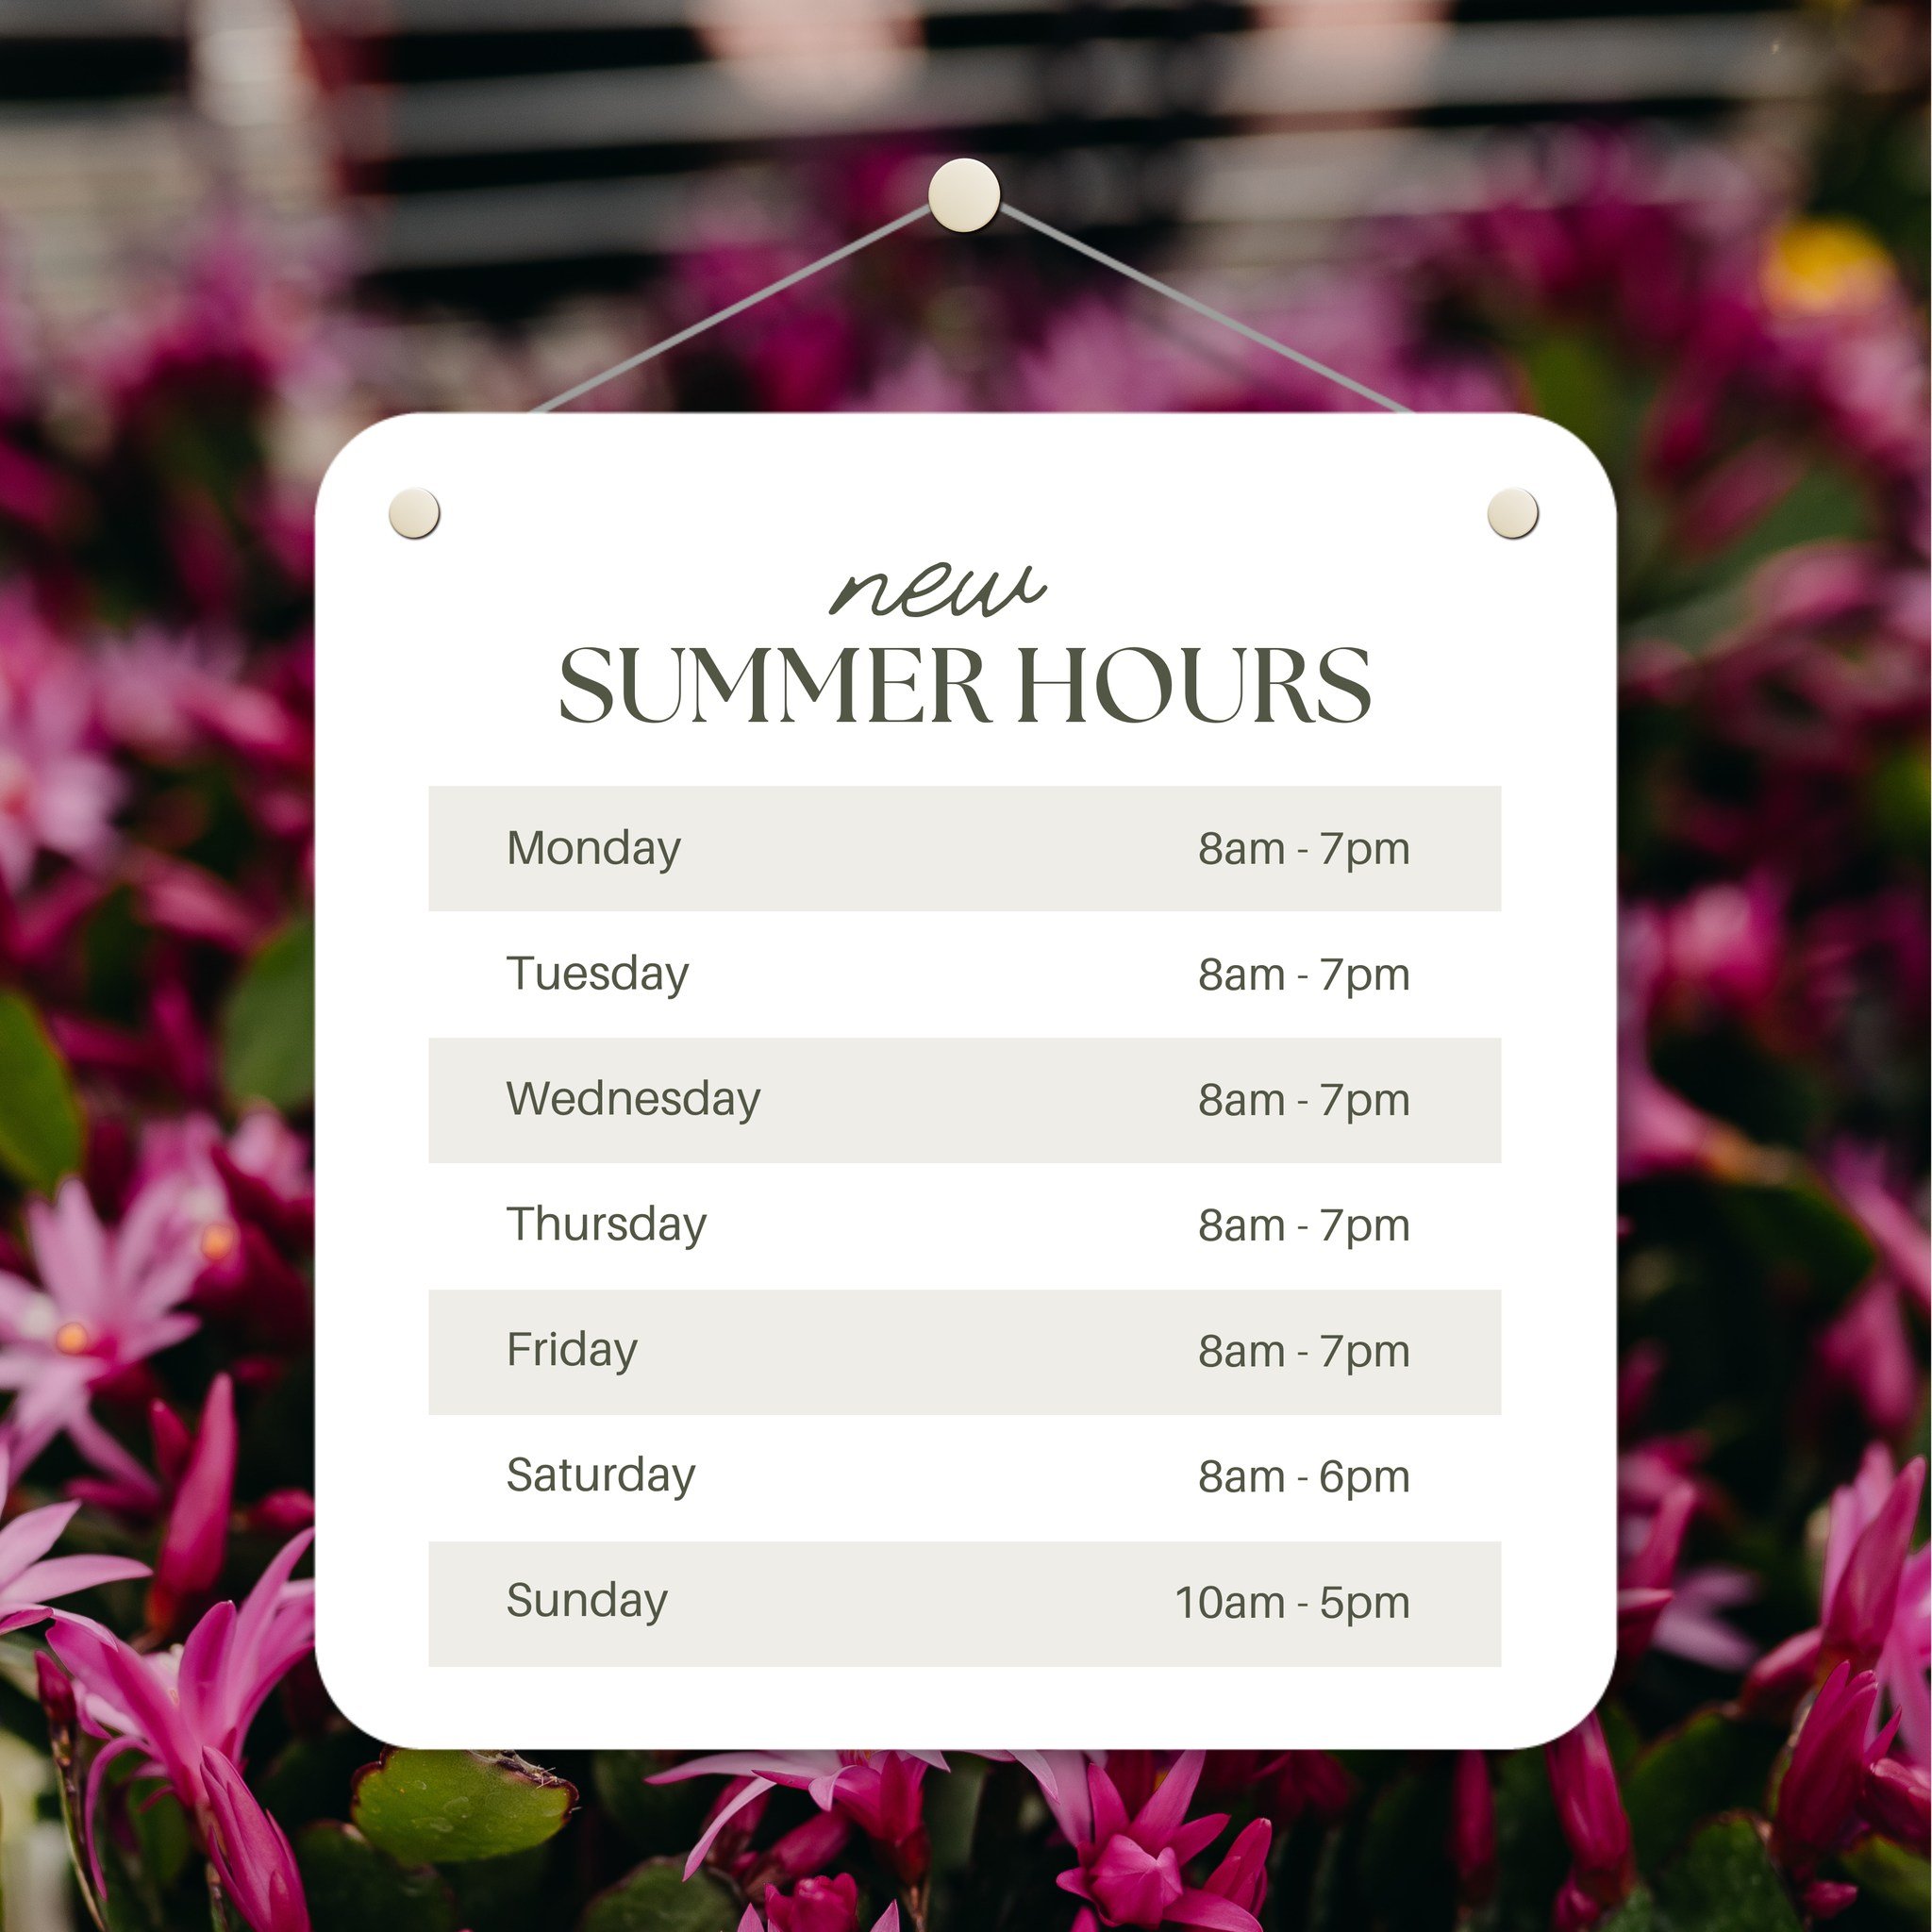 Hope you had a wonderful weekend!! Early Summer Hours begin tomorrow! 🤩

Open longer hours for your spring gardening needs!

#downtoearth #gardencenter #eauclaire